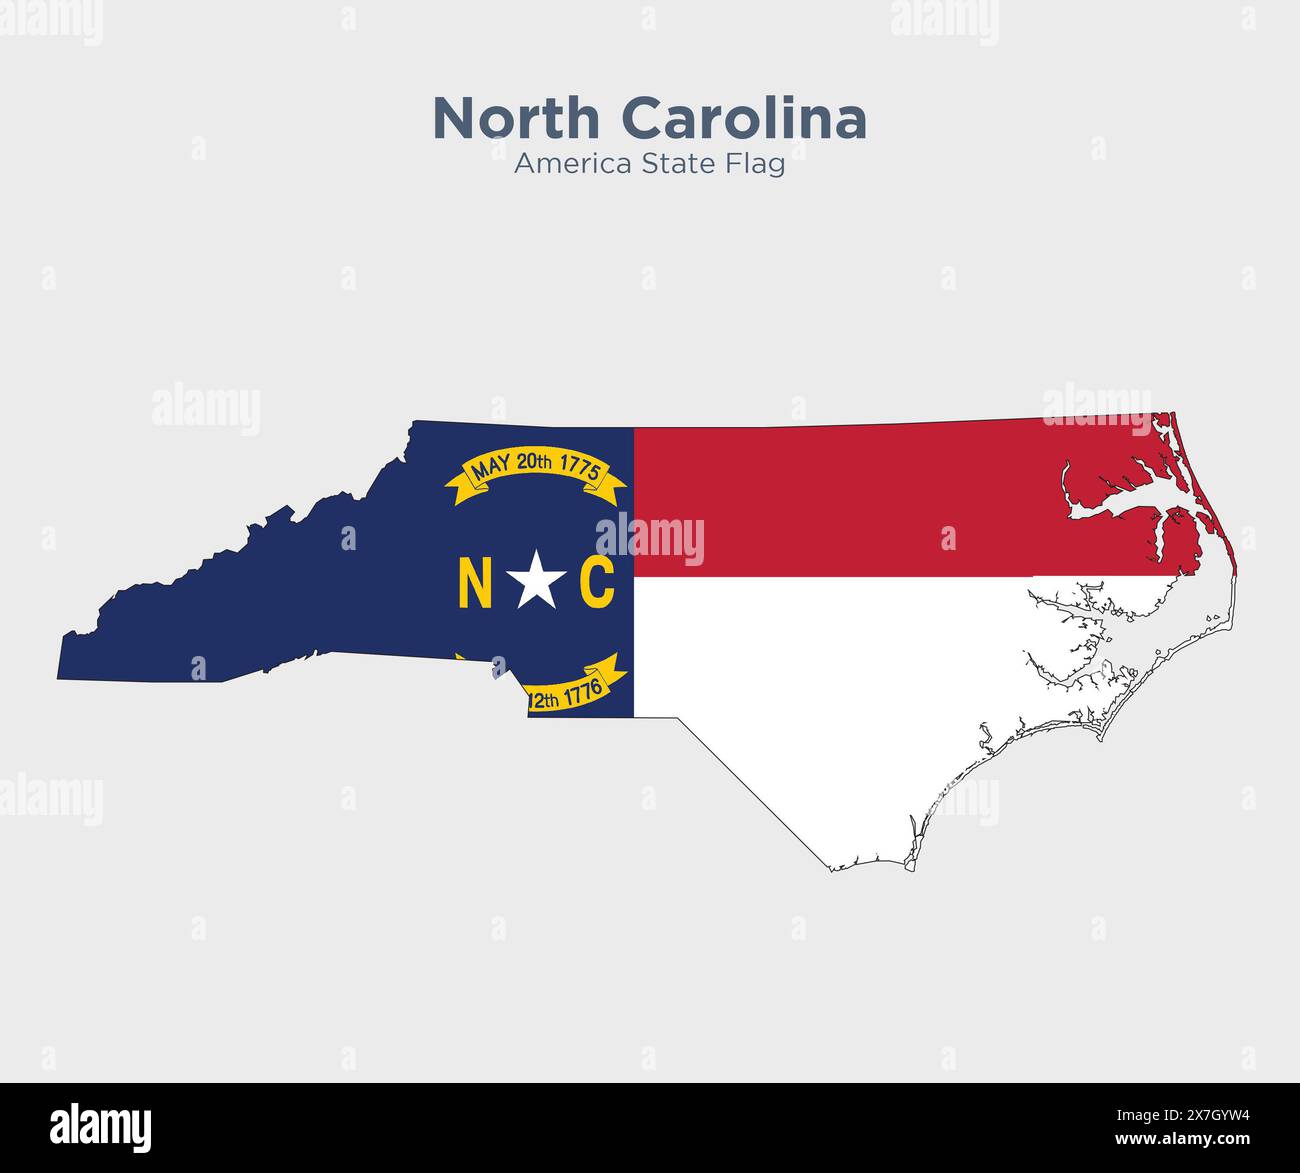 North Carolina flag and map. Flags of the U.S. states and territories. America states flag and map on white background. Stock Photo